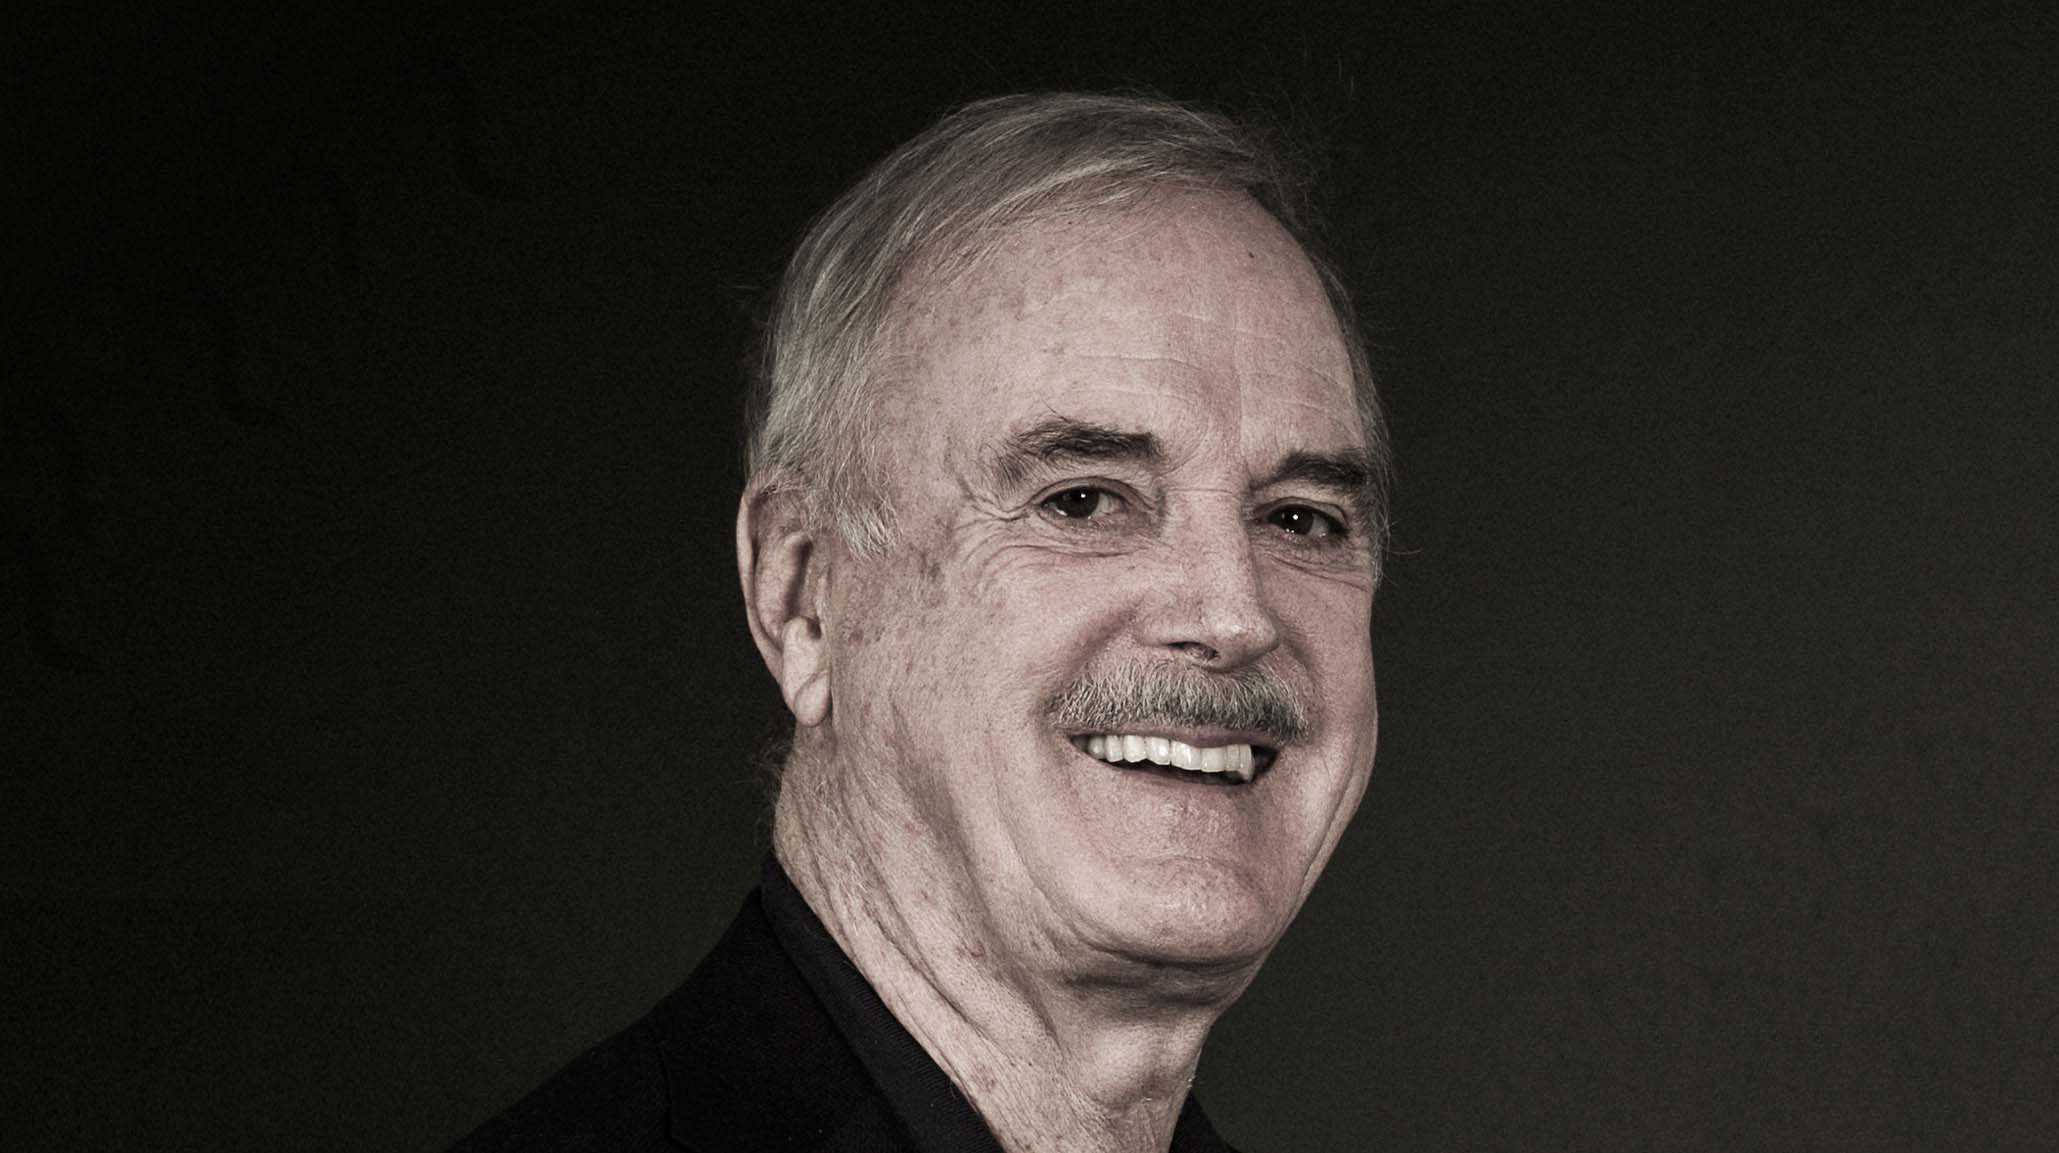 John Cleese at Southbank Centre. Photo by Andy Gotts